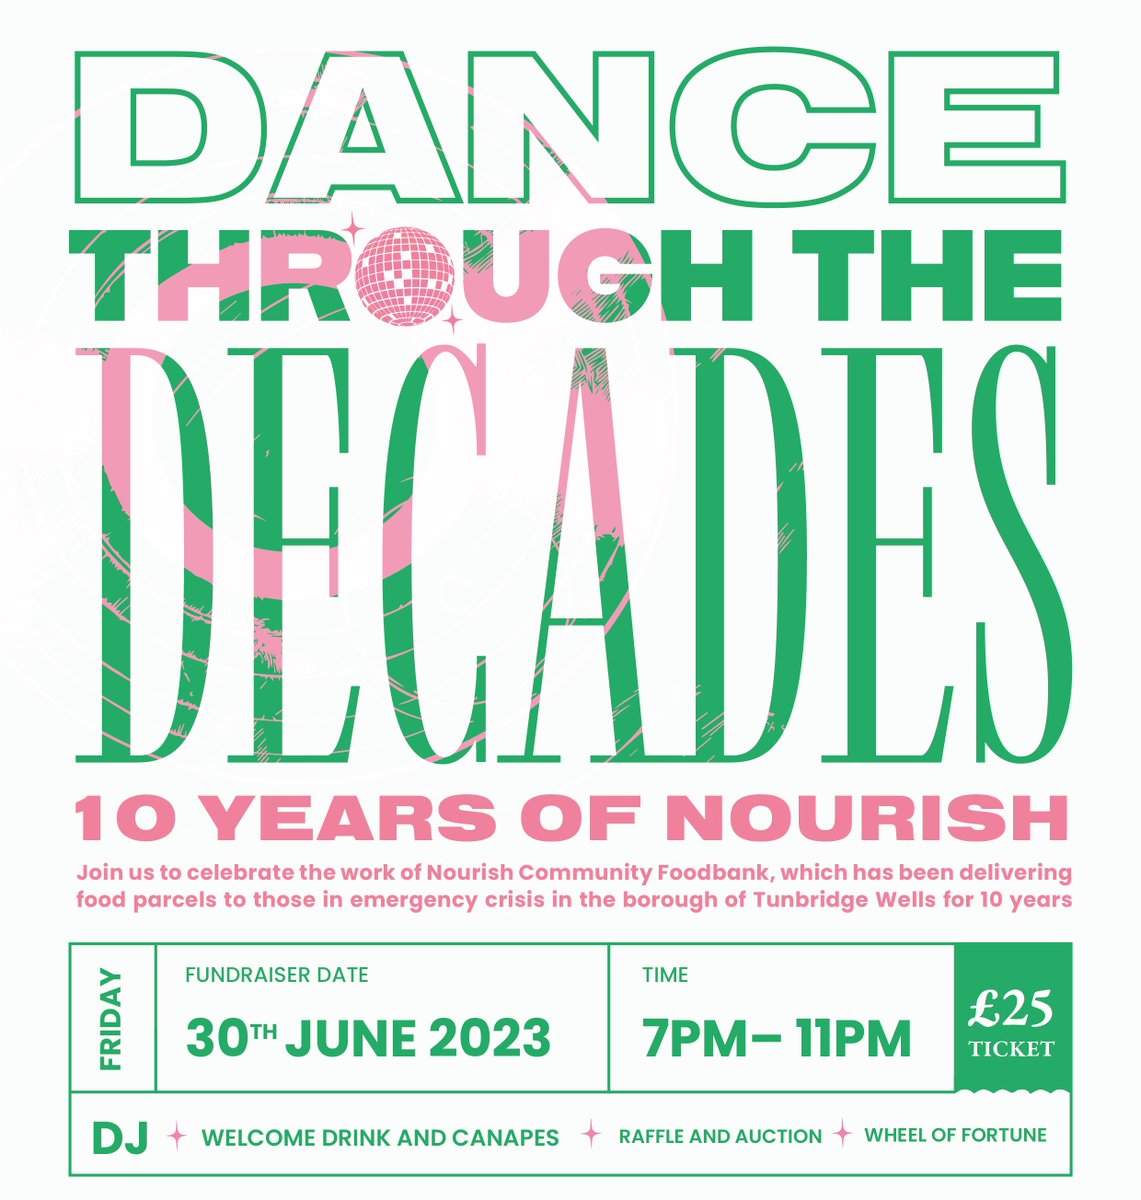 Our local foodbank @NourishFoodbank - which we supported at our summer event last year - is holding a 'Dance Through The Decades' fundraiser on Friday 30 June to celebrate its 10th anniversary.  Buy tickets here: eventbrite.co.uk/e/dance-throug… #welistenwesharewebenefit #tunbridgewells